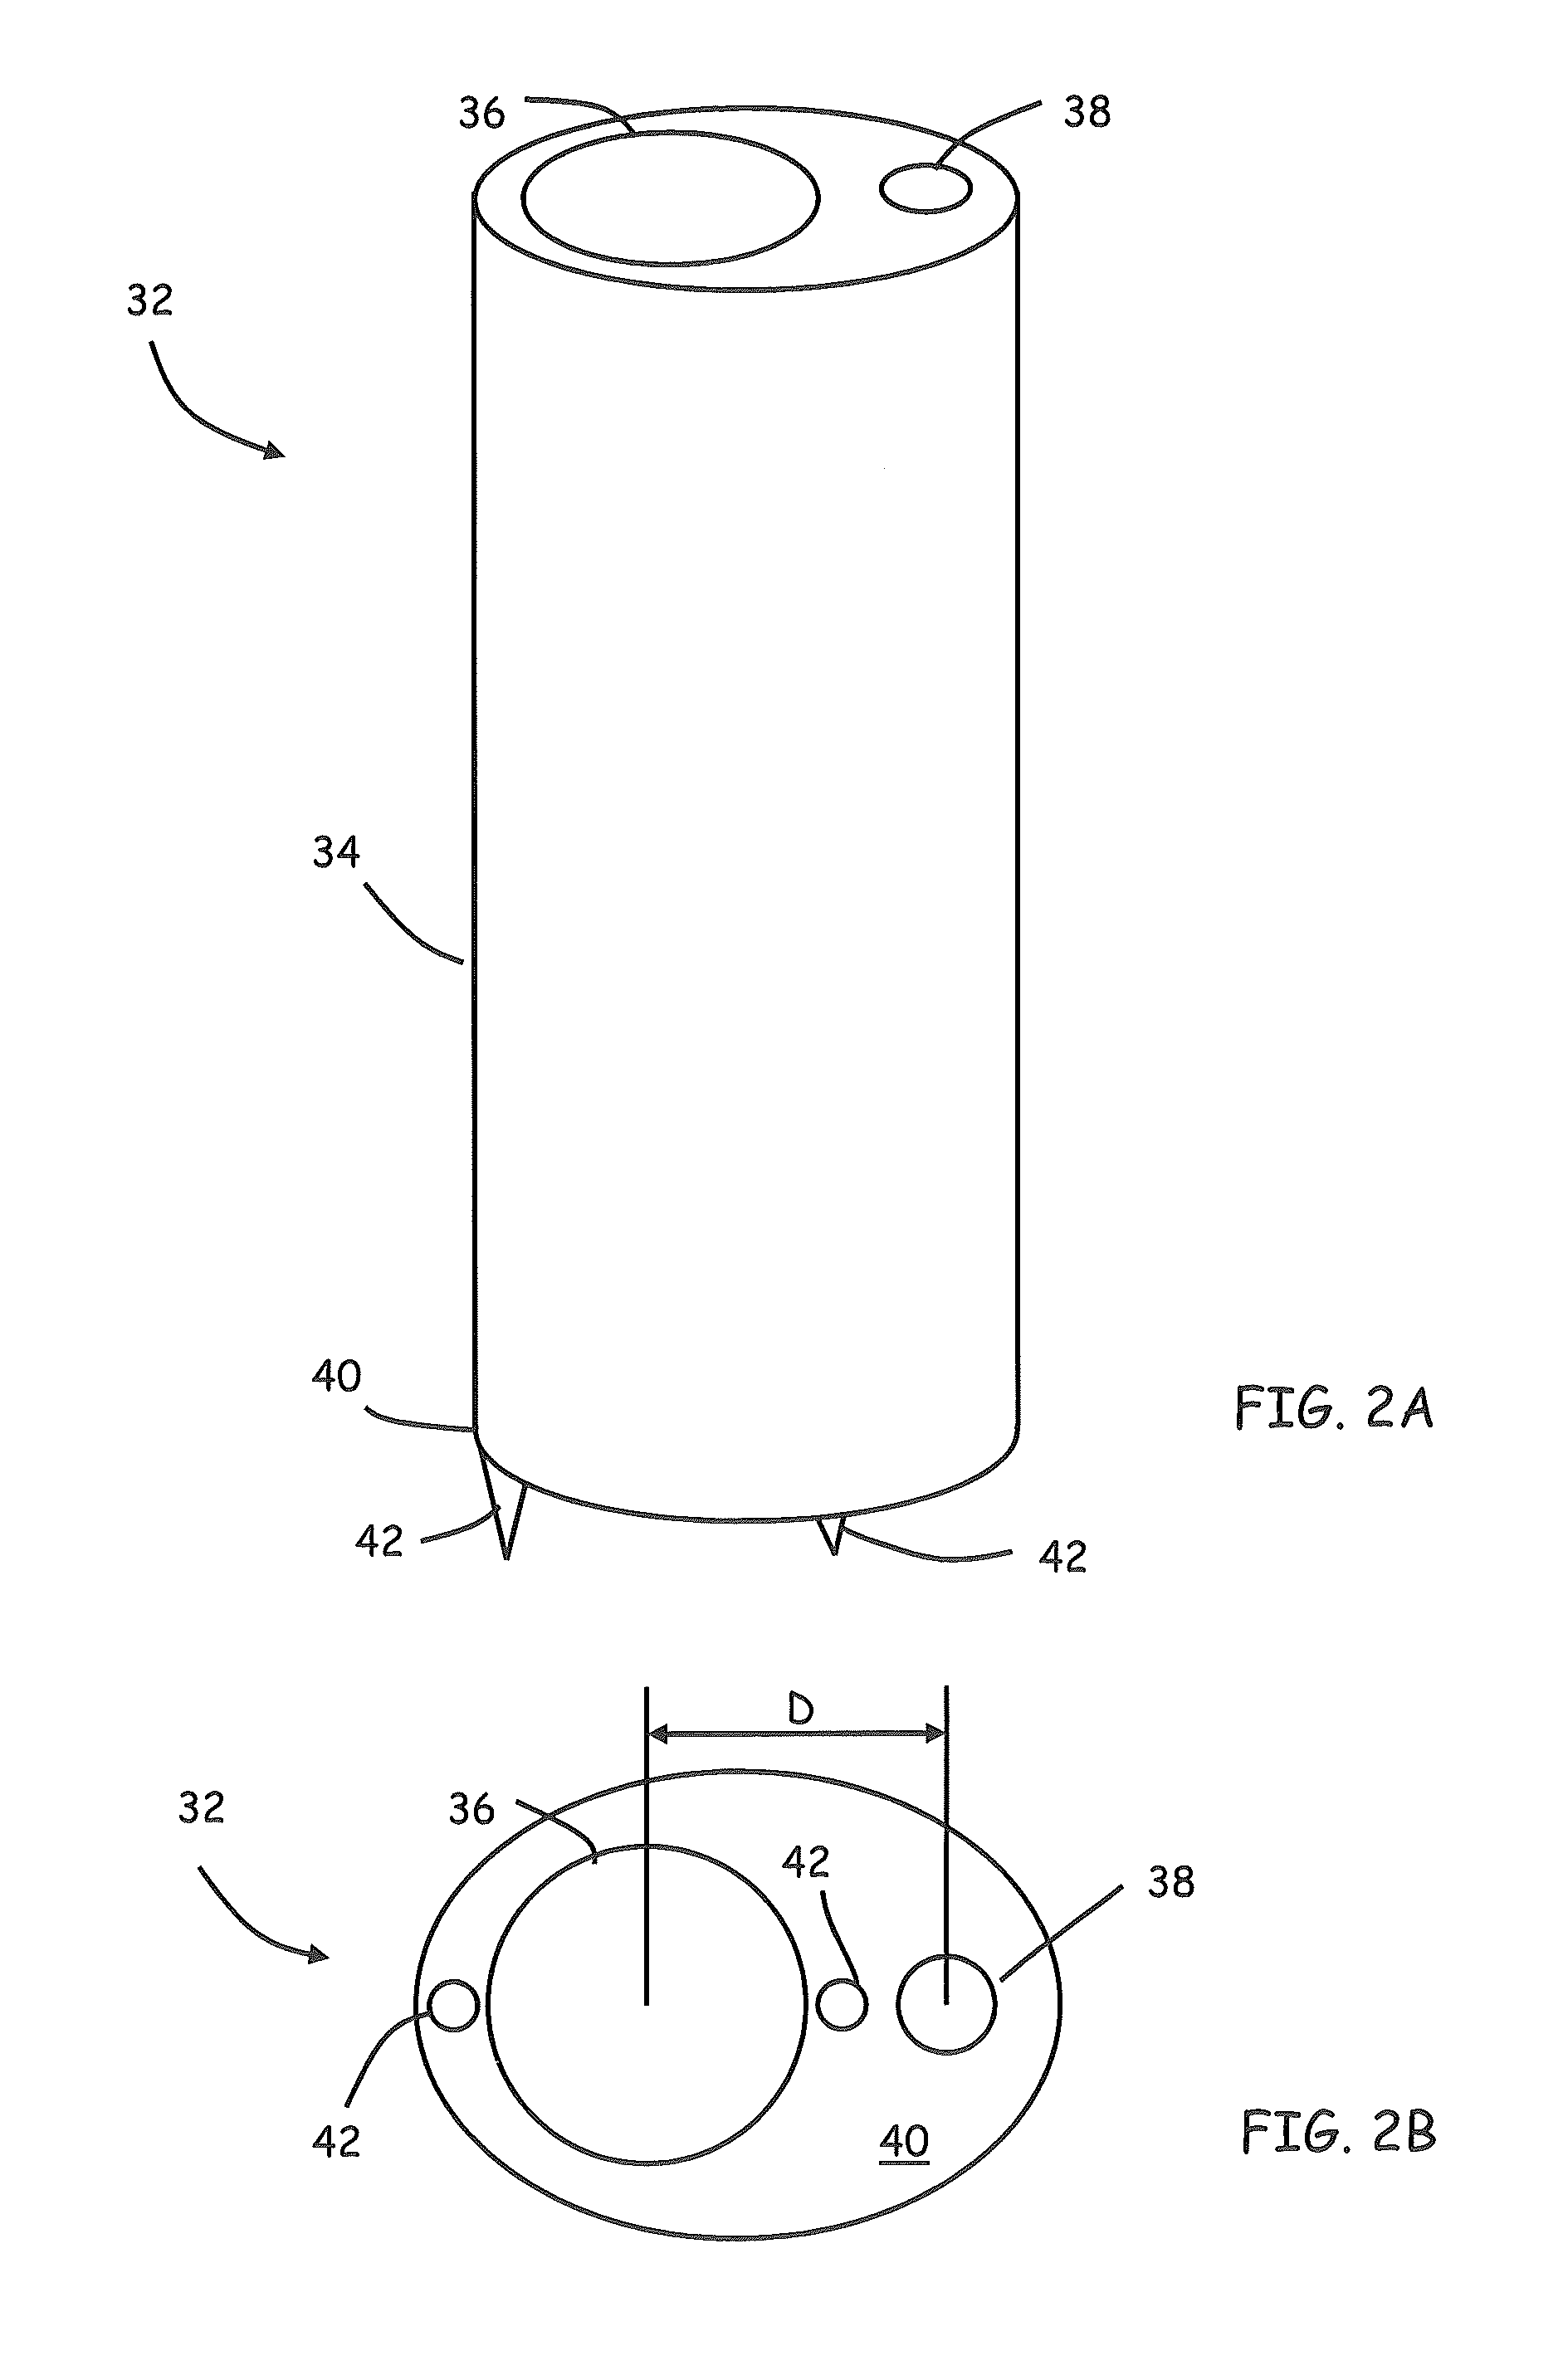 Spinal facet fusion device and method of operation